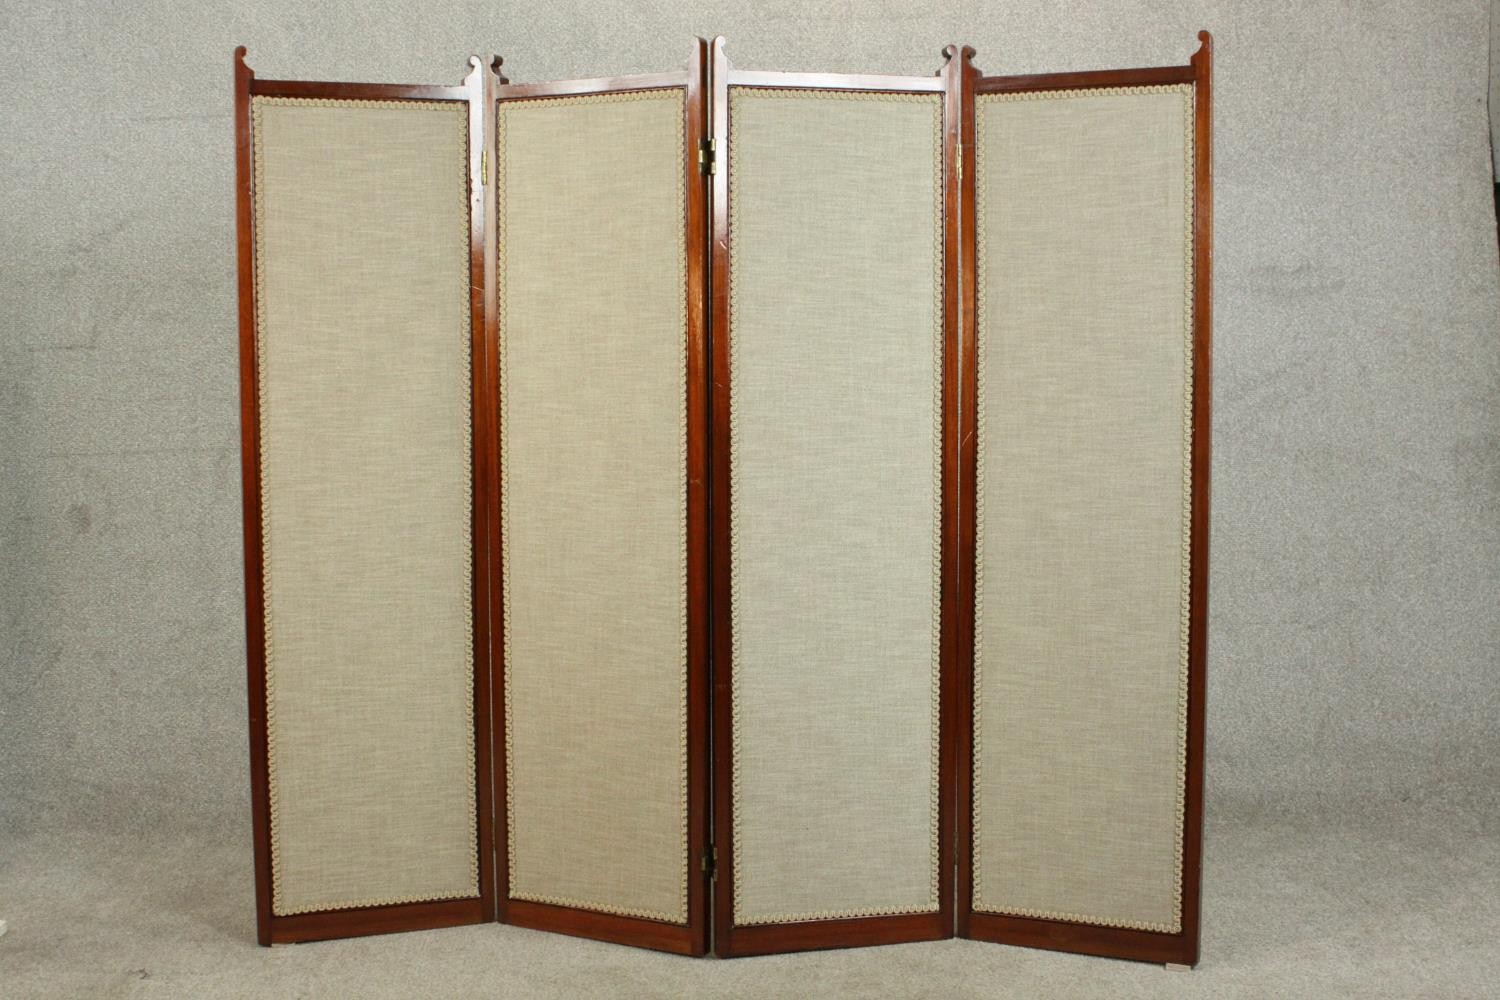 An Edwardian walnut fourfold screen, each panel upholstered with an oatmeal coloured fabric, with - Image 3 of 10